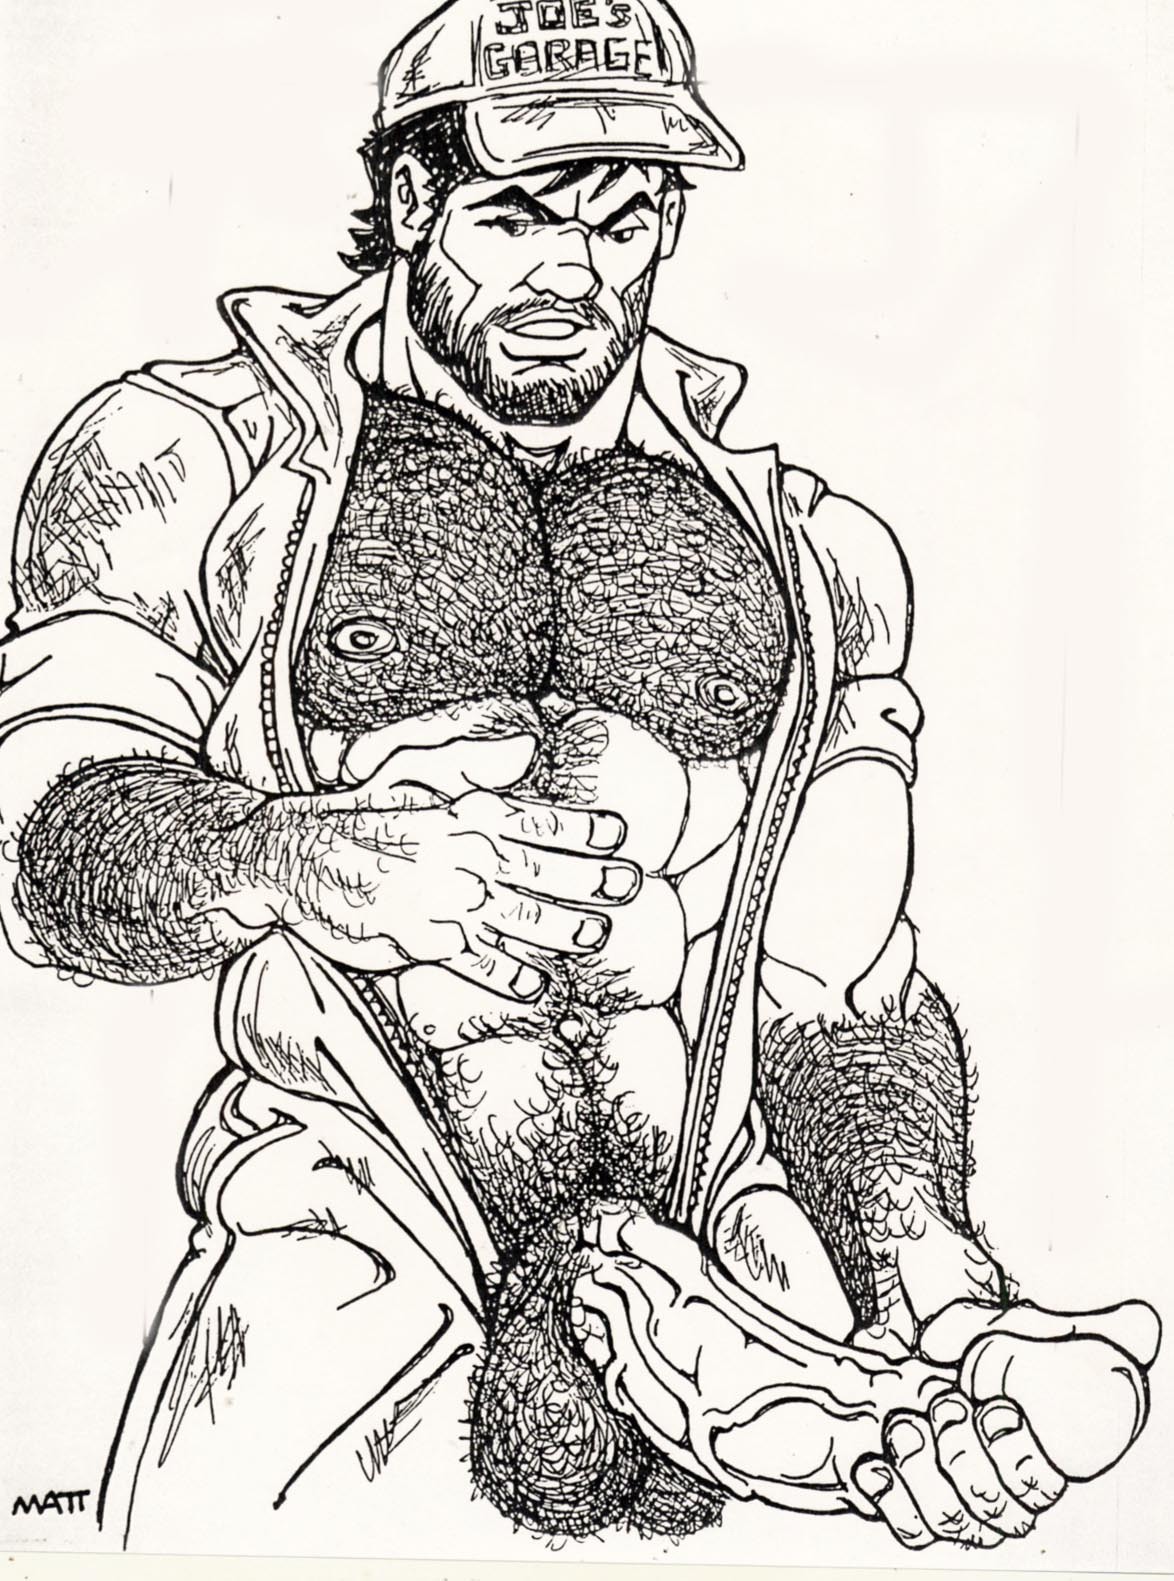 gay-erotic-art:  And now the burly art of Matt aka Charles Kerbs  There is a wonderful